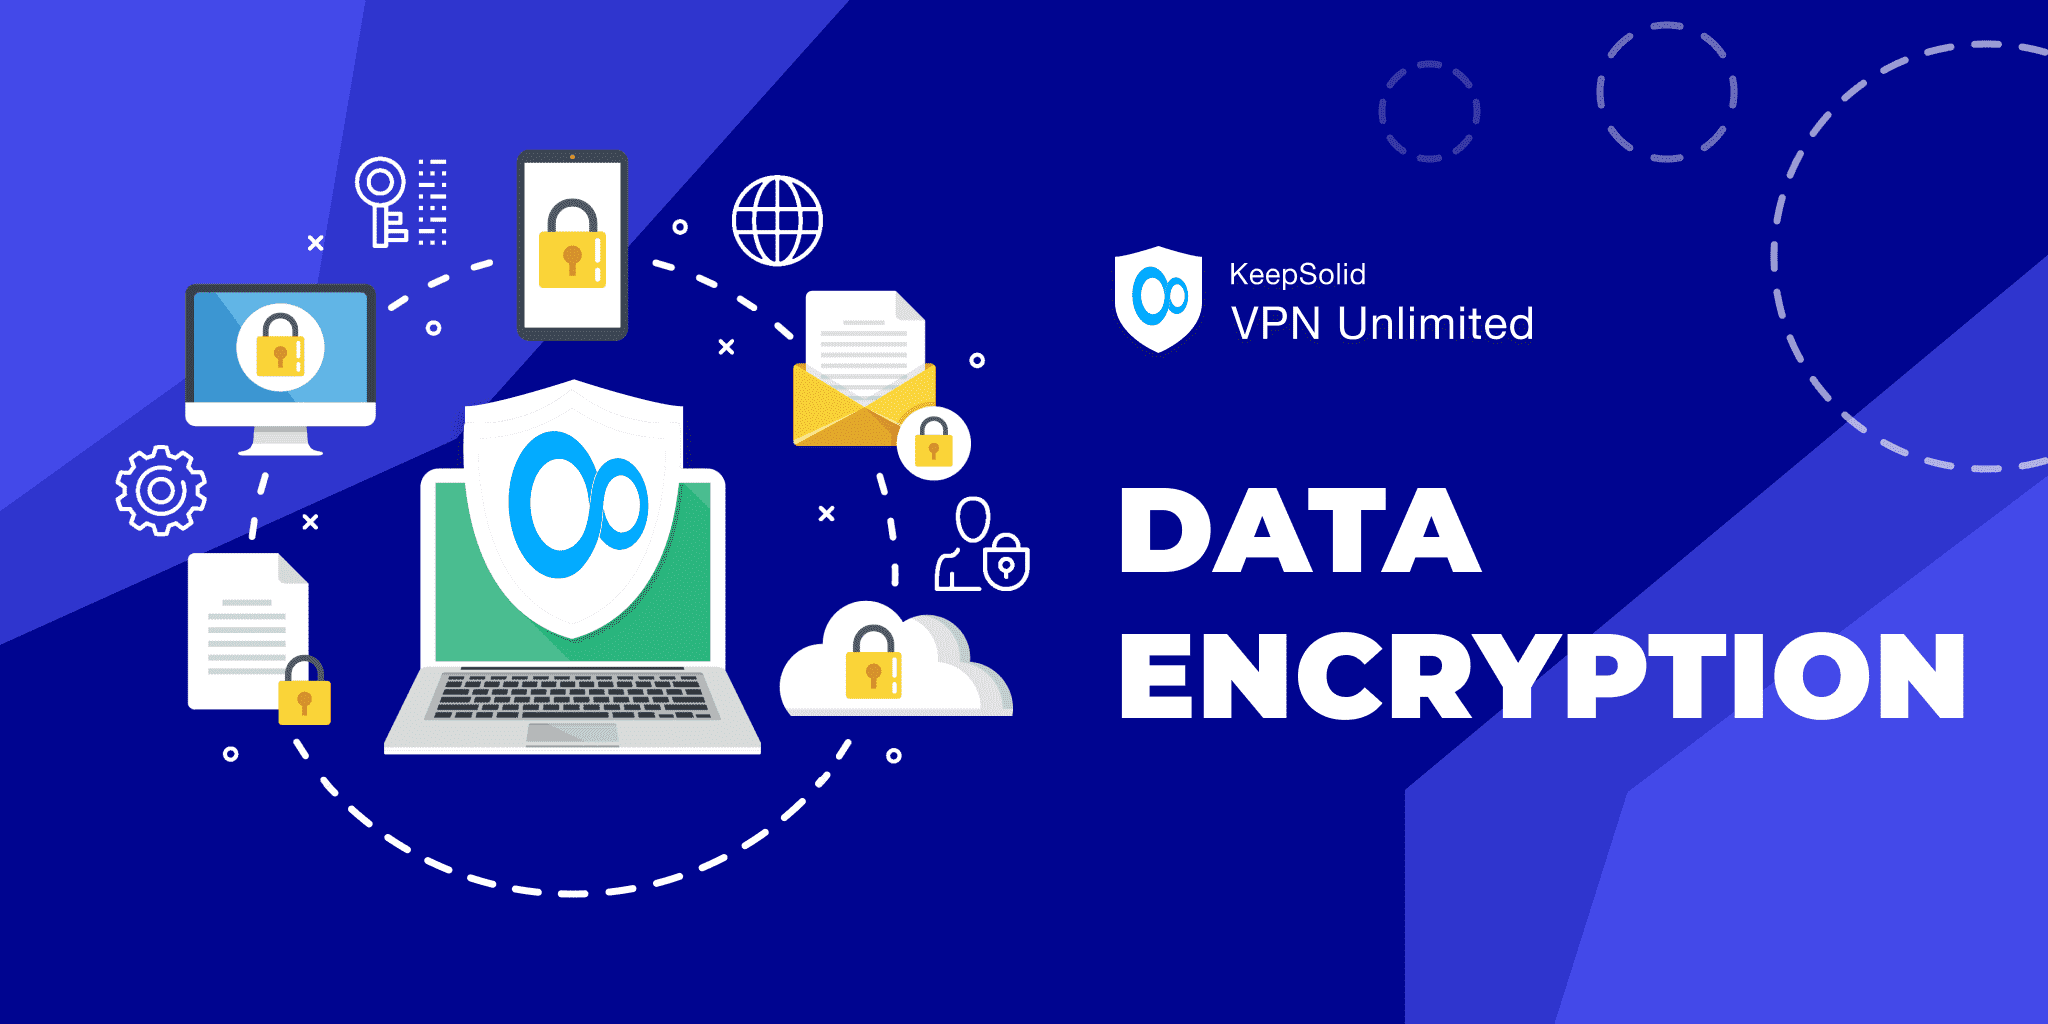 Data security through VPN encryption - great tip to stay safe online